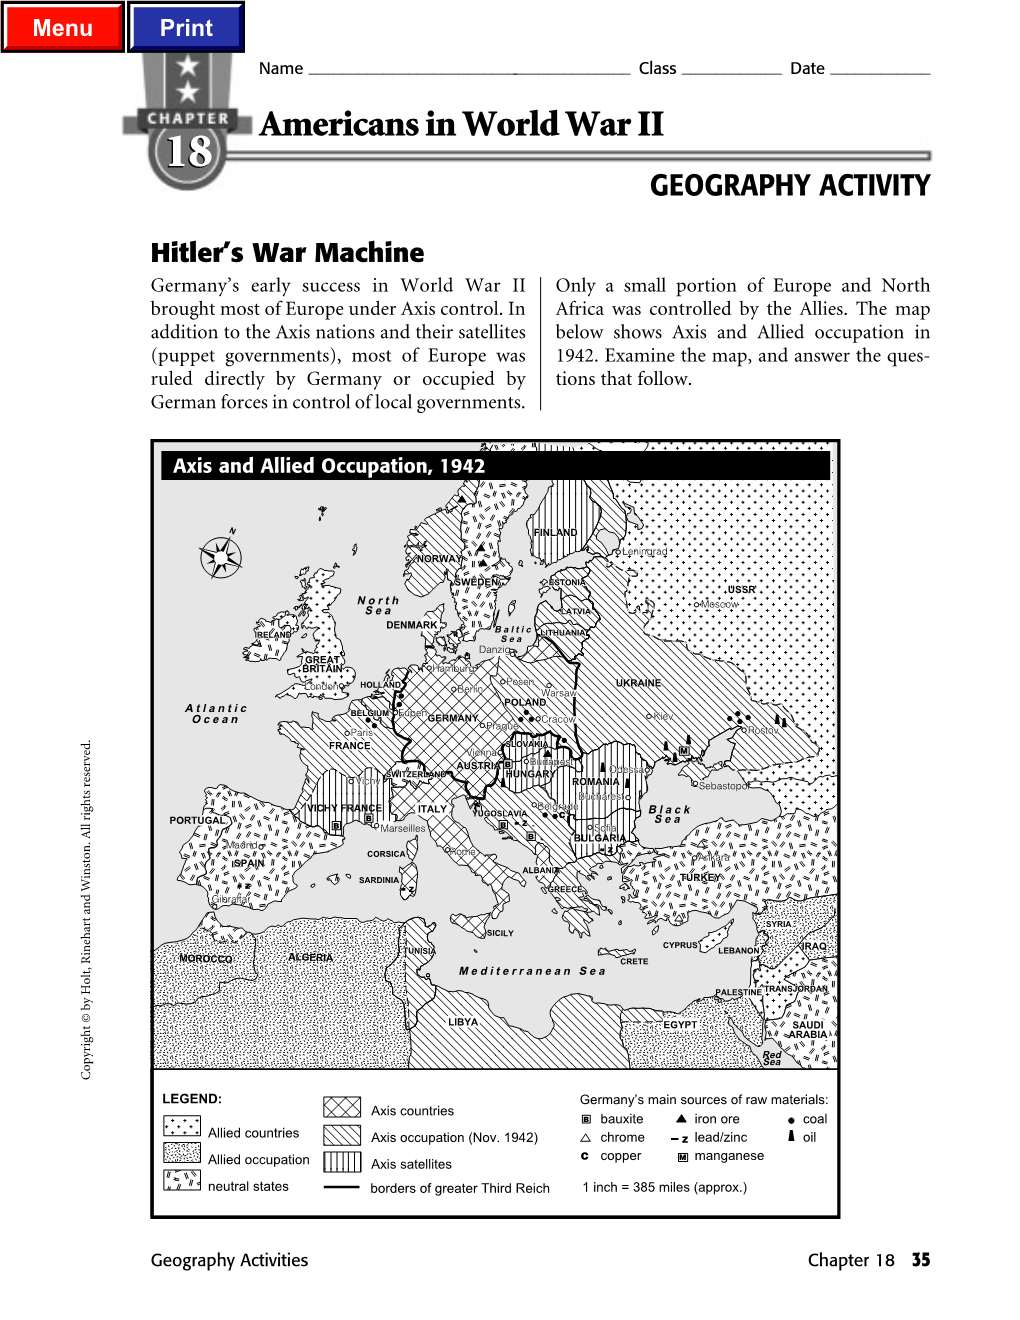 Americans in World War II 18 GEOGRAPHY ACTIVITY